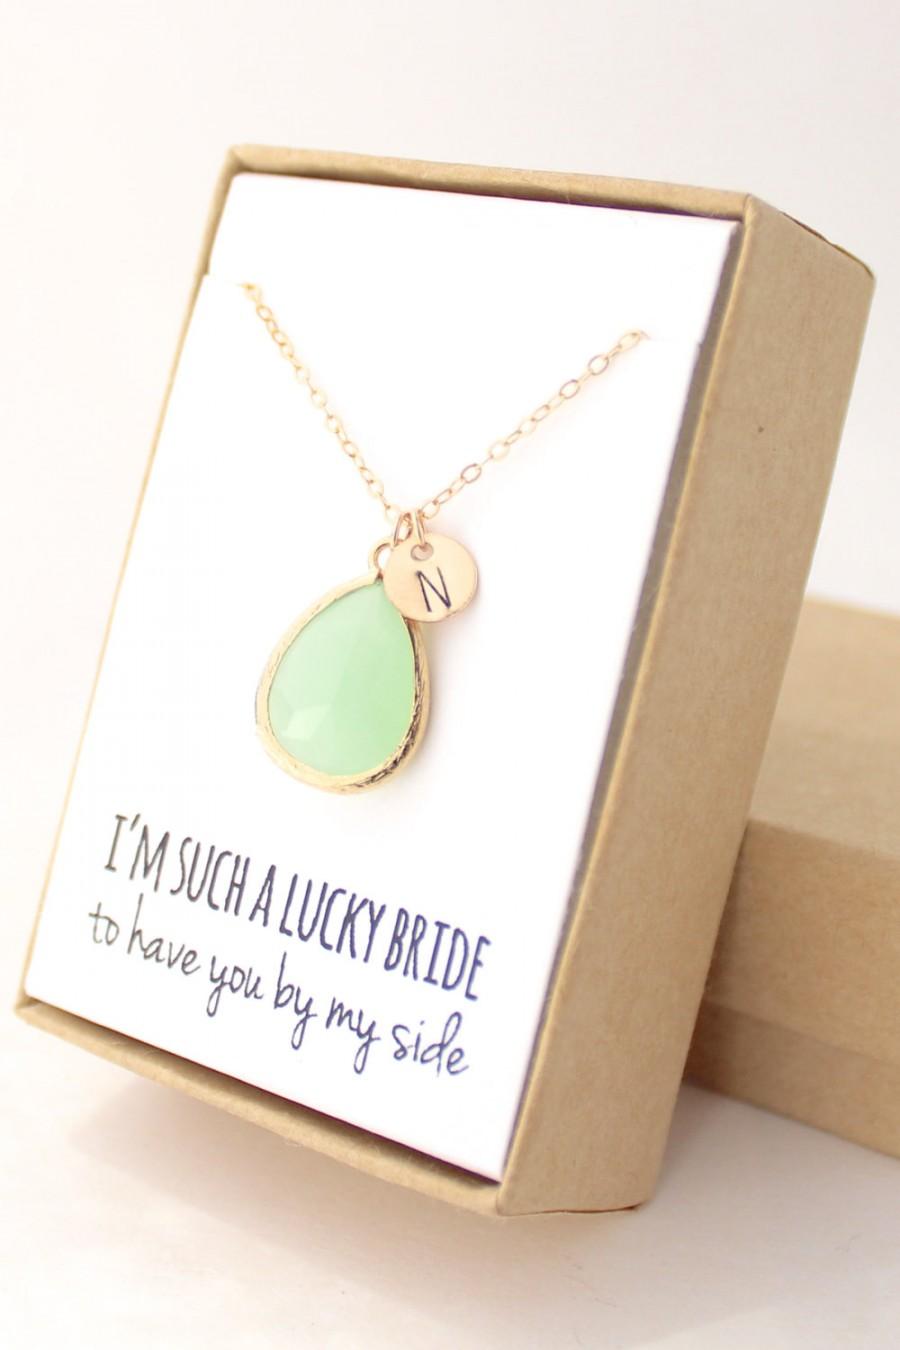 Mariage - Light Mint / Gold Teardrop Necklace - Mint Bridesmaid Necklace - Bridesmaid Gift Jewelry - Mint and Gold Necklace - NB1